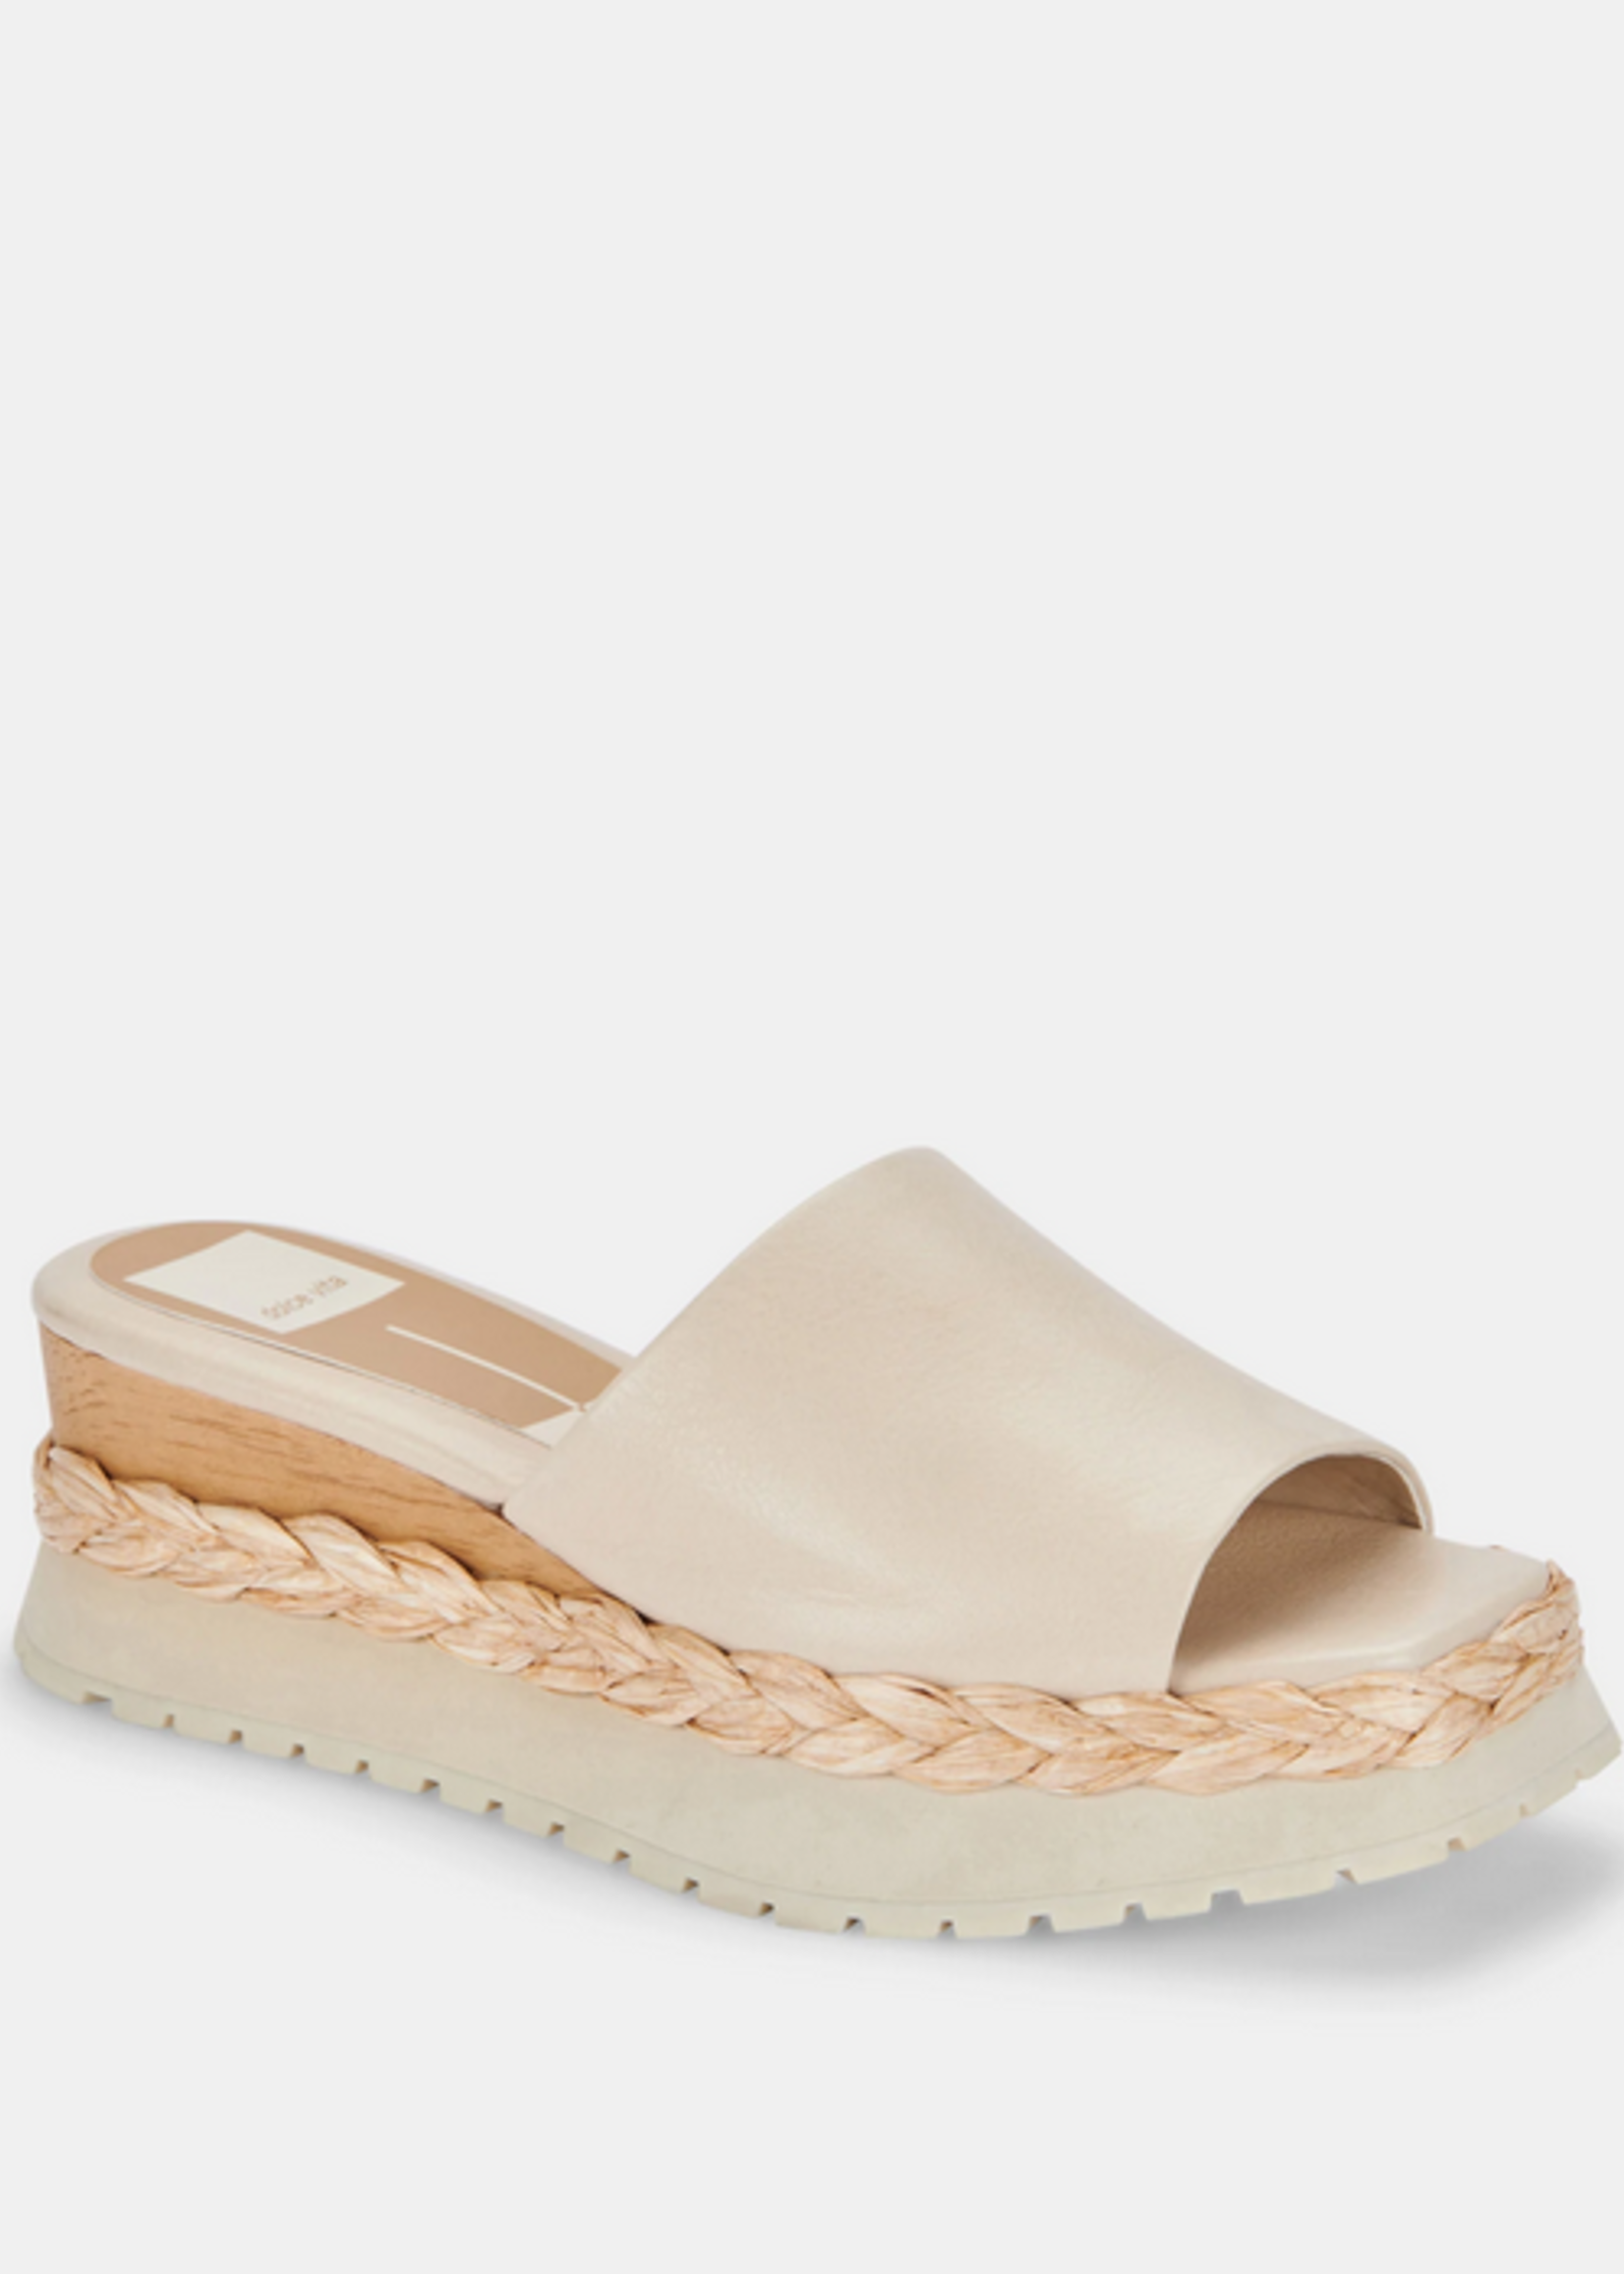 Dolce Vita Francy Wedge - Sand Leather